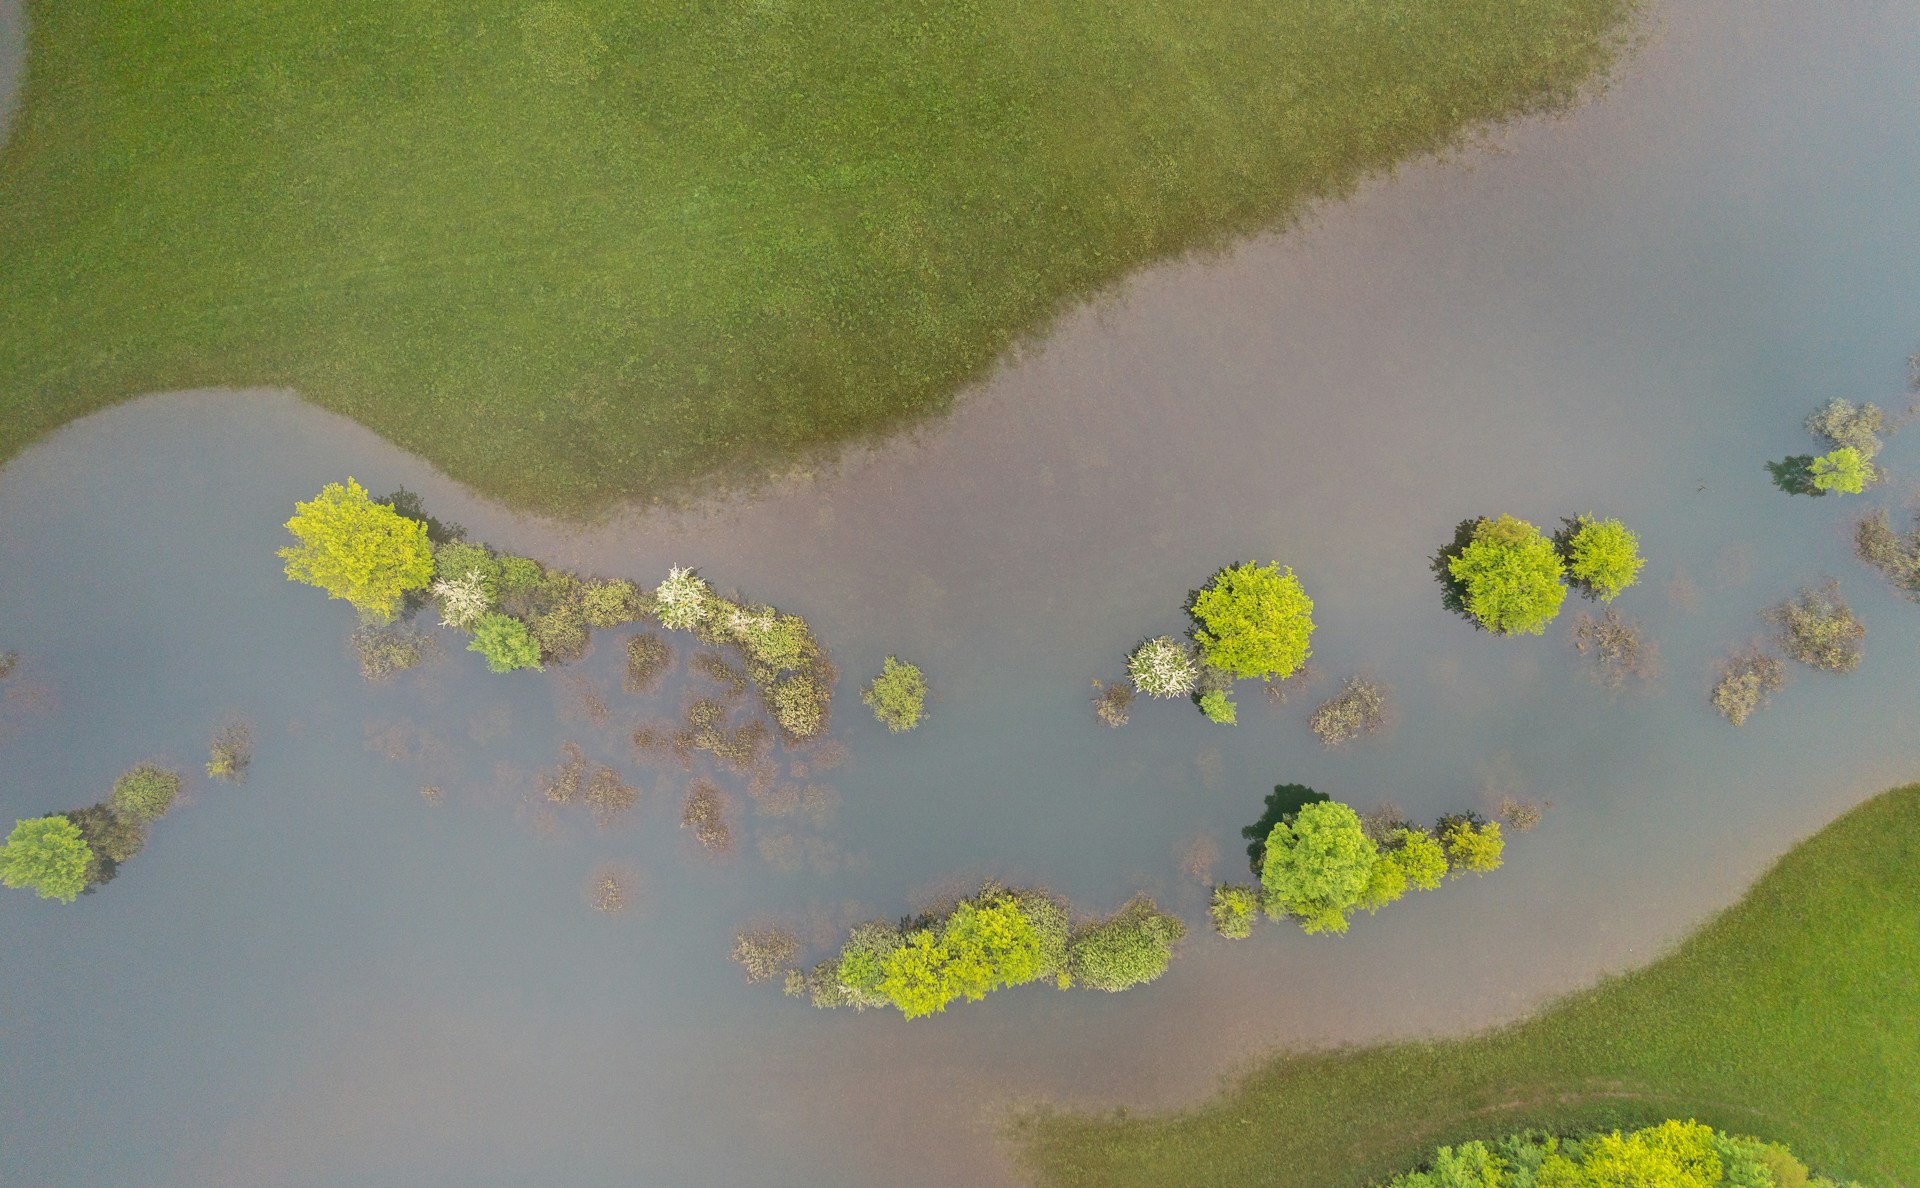 An aerial view of flooding and submerged trees